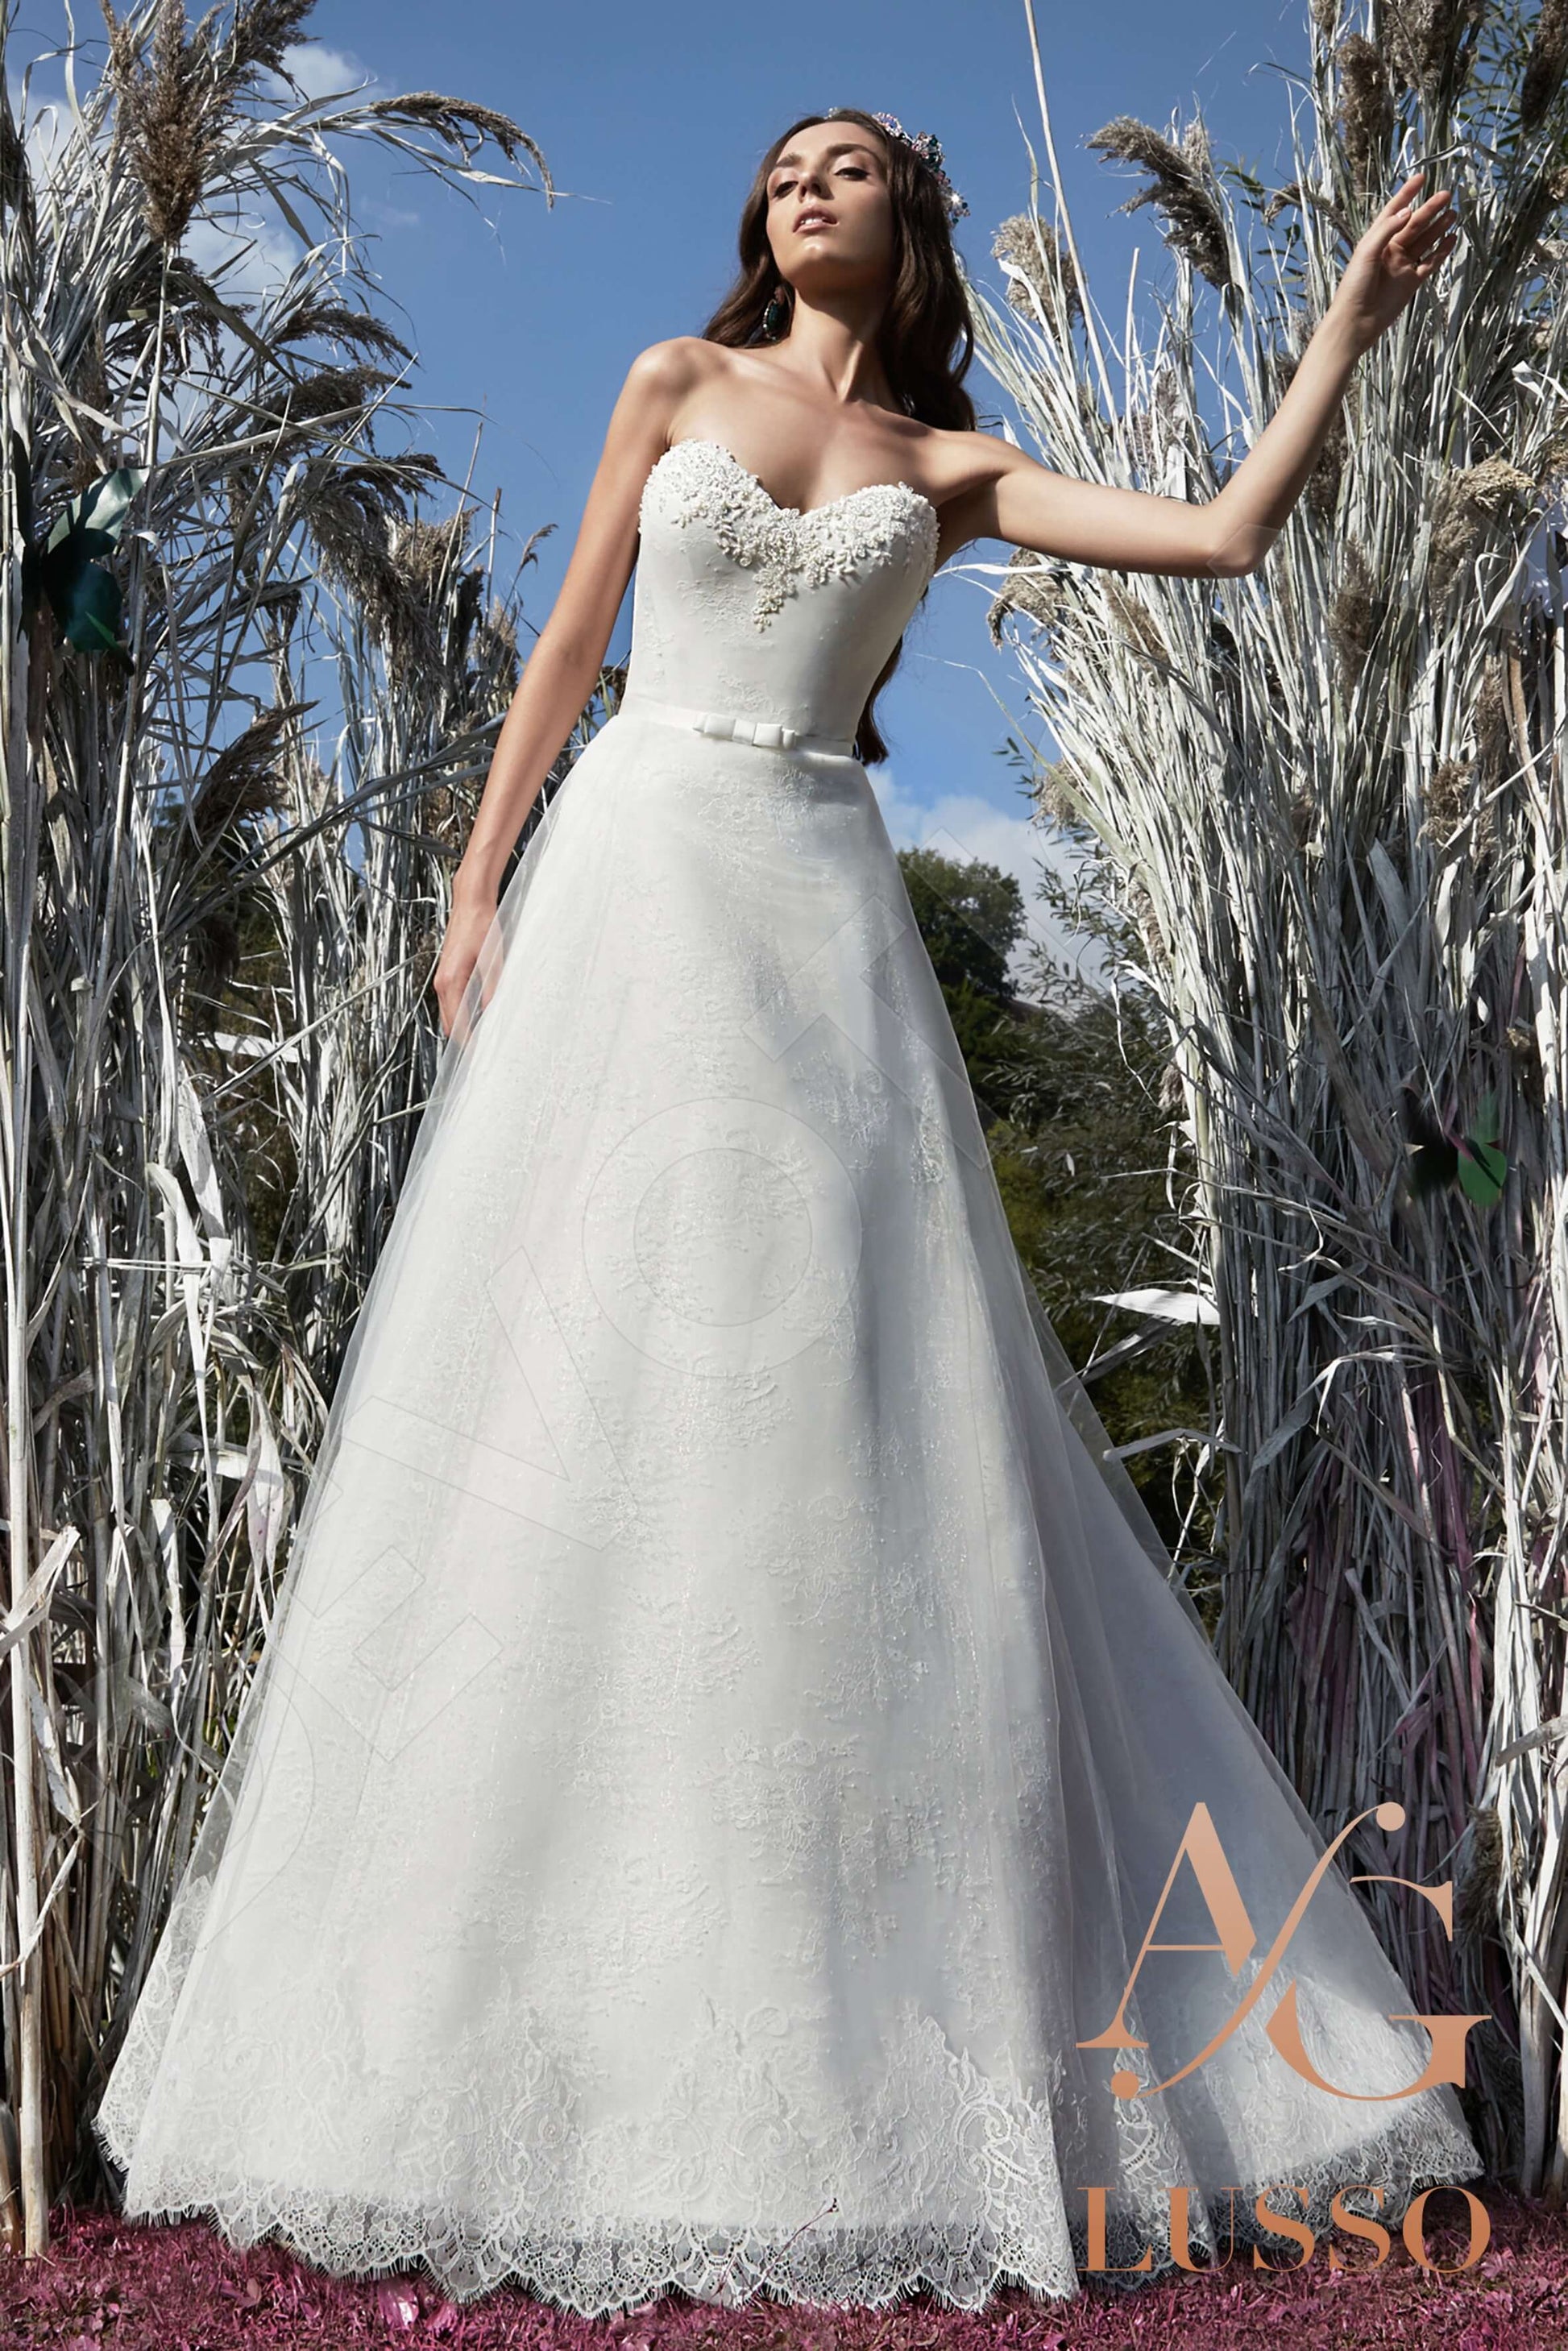 Corset Wedding Dress, Purchase One of Our Corset Wedding Dresses at  Devotion Dresses